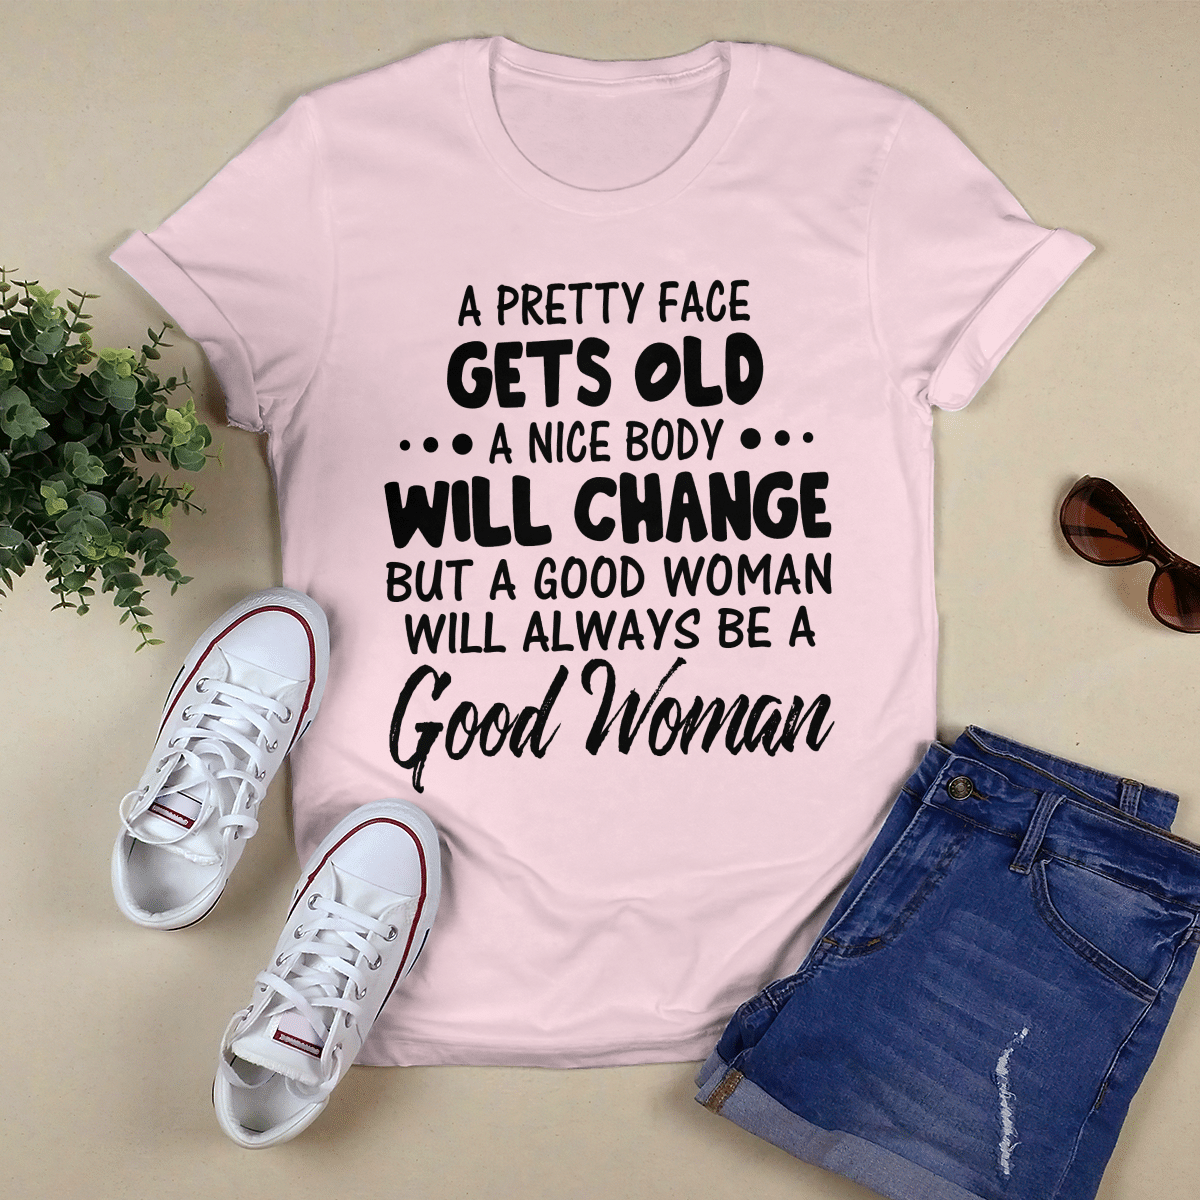 A Pretty Face Gets Old shirt